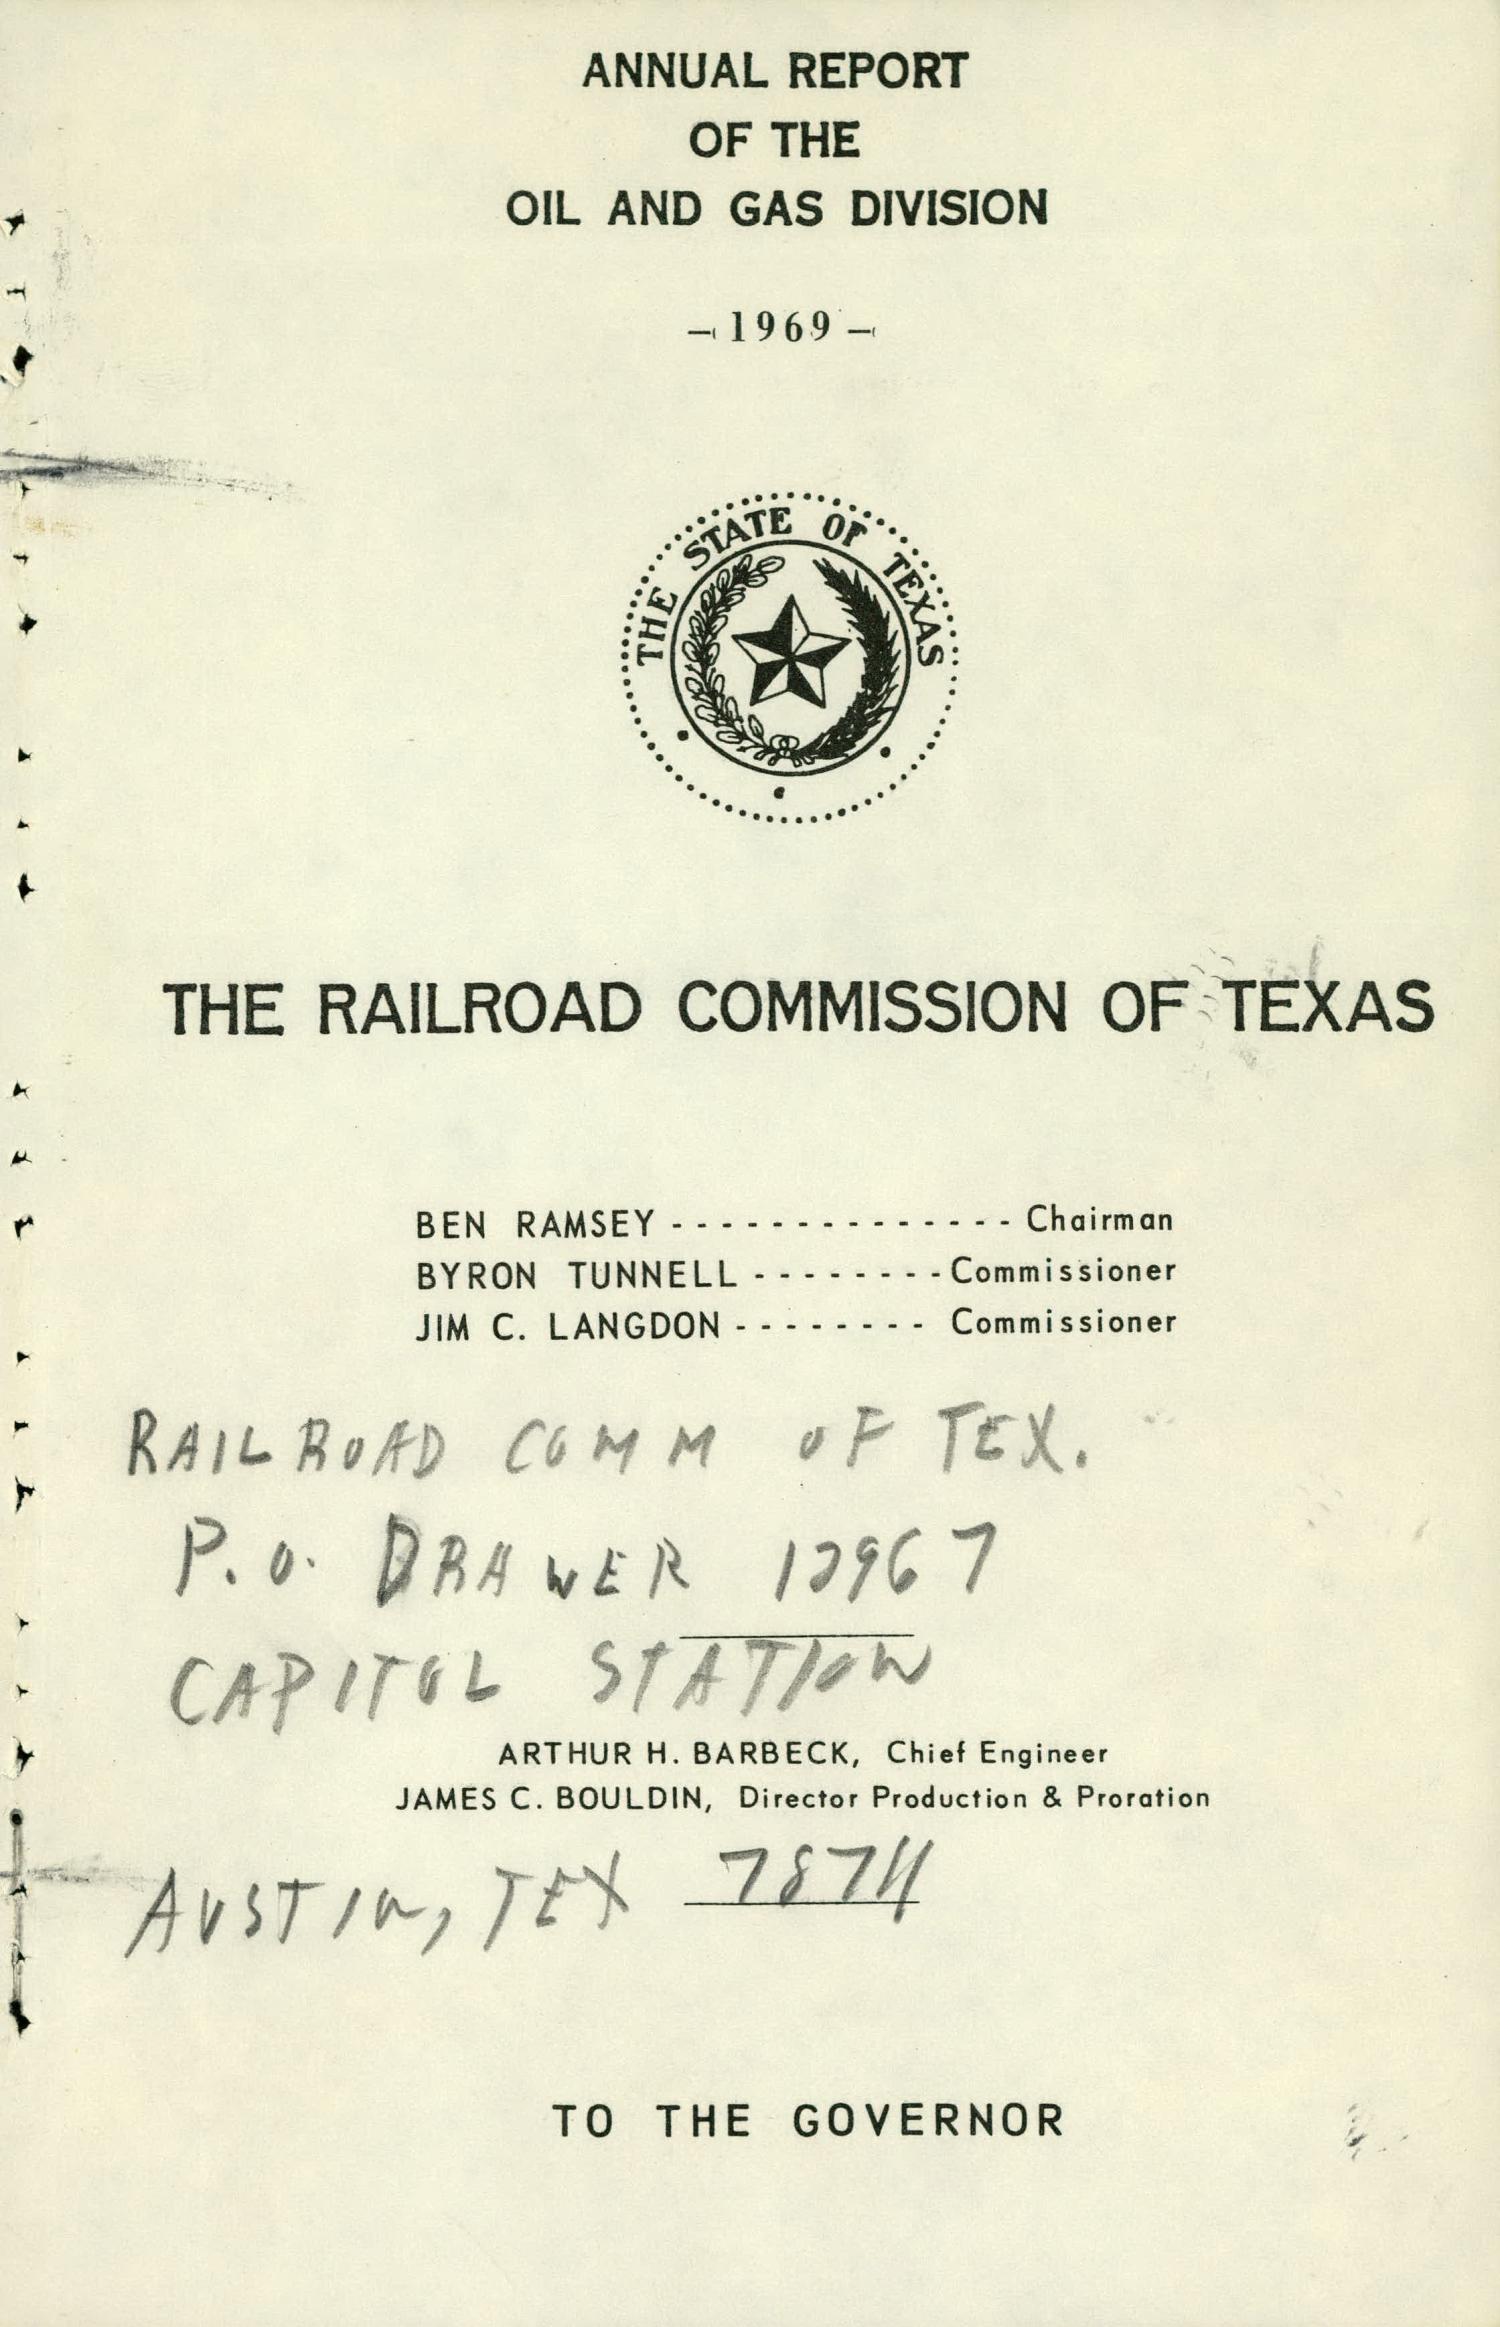 Railroad Commission of Texas Oil and Gas Division Annual Report: 1969
                                                
                                                    TITLE PAGE
                                                